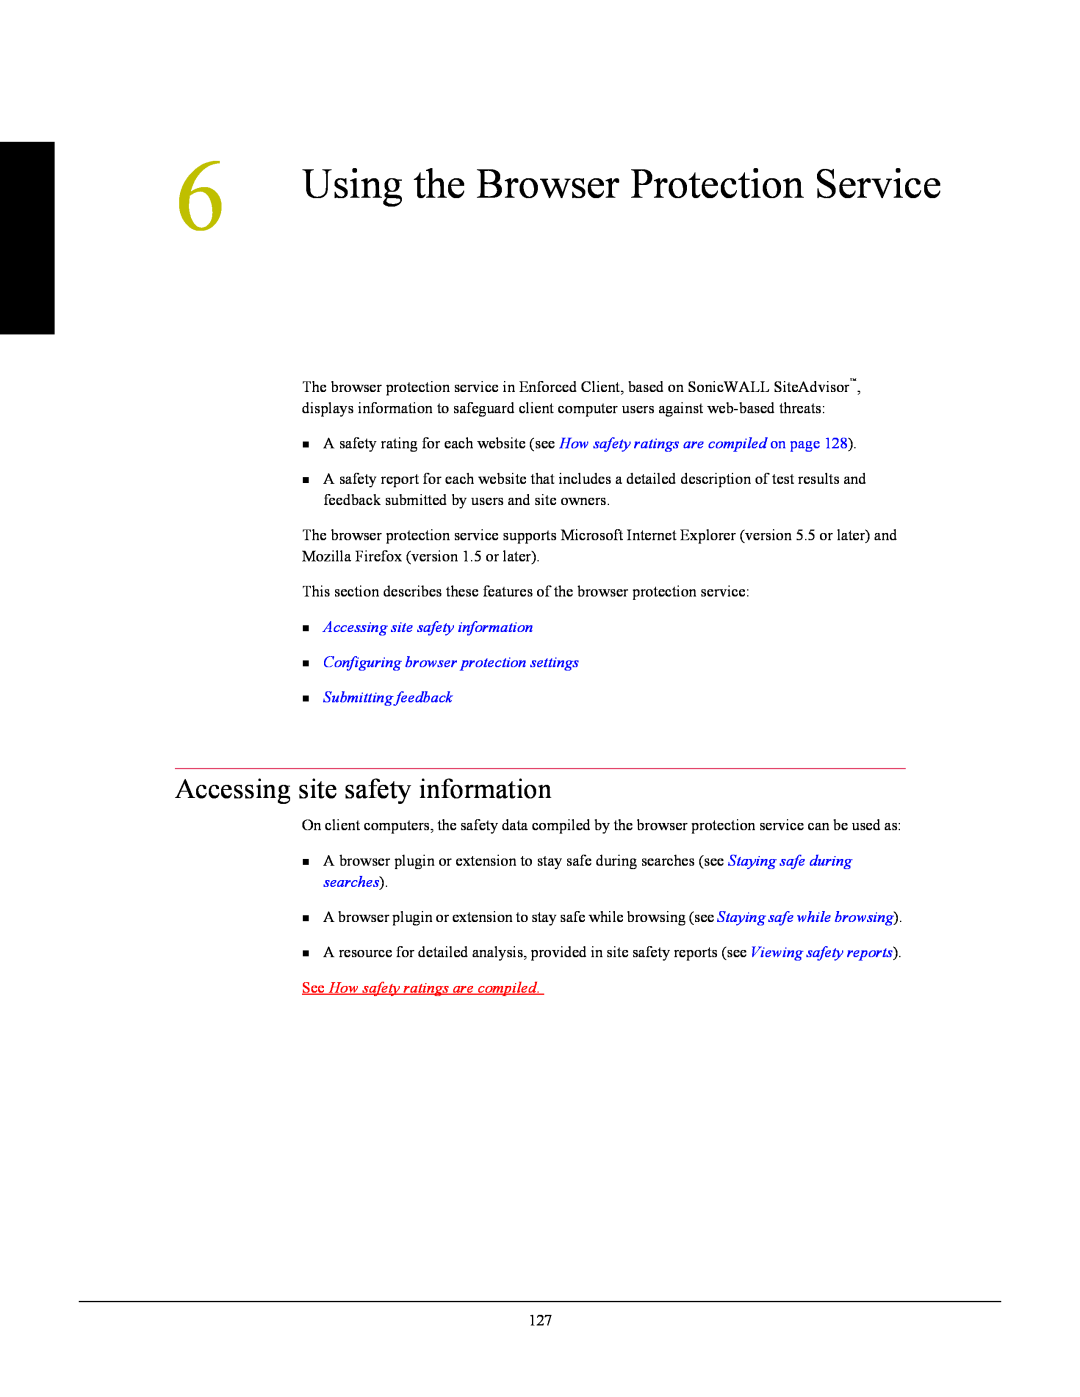 SonicWALL 4.5 manual Using the Browser Protection Service, „ Accessing site safety information 